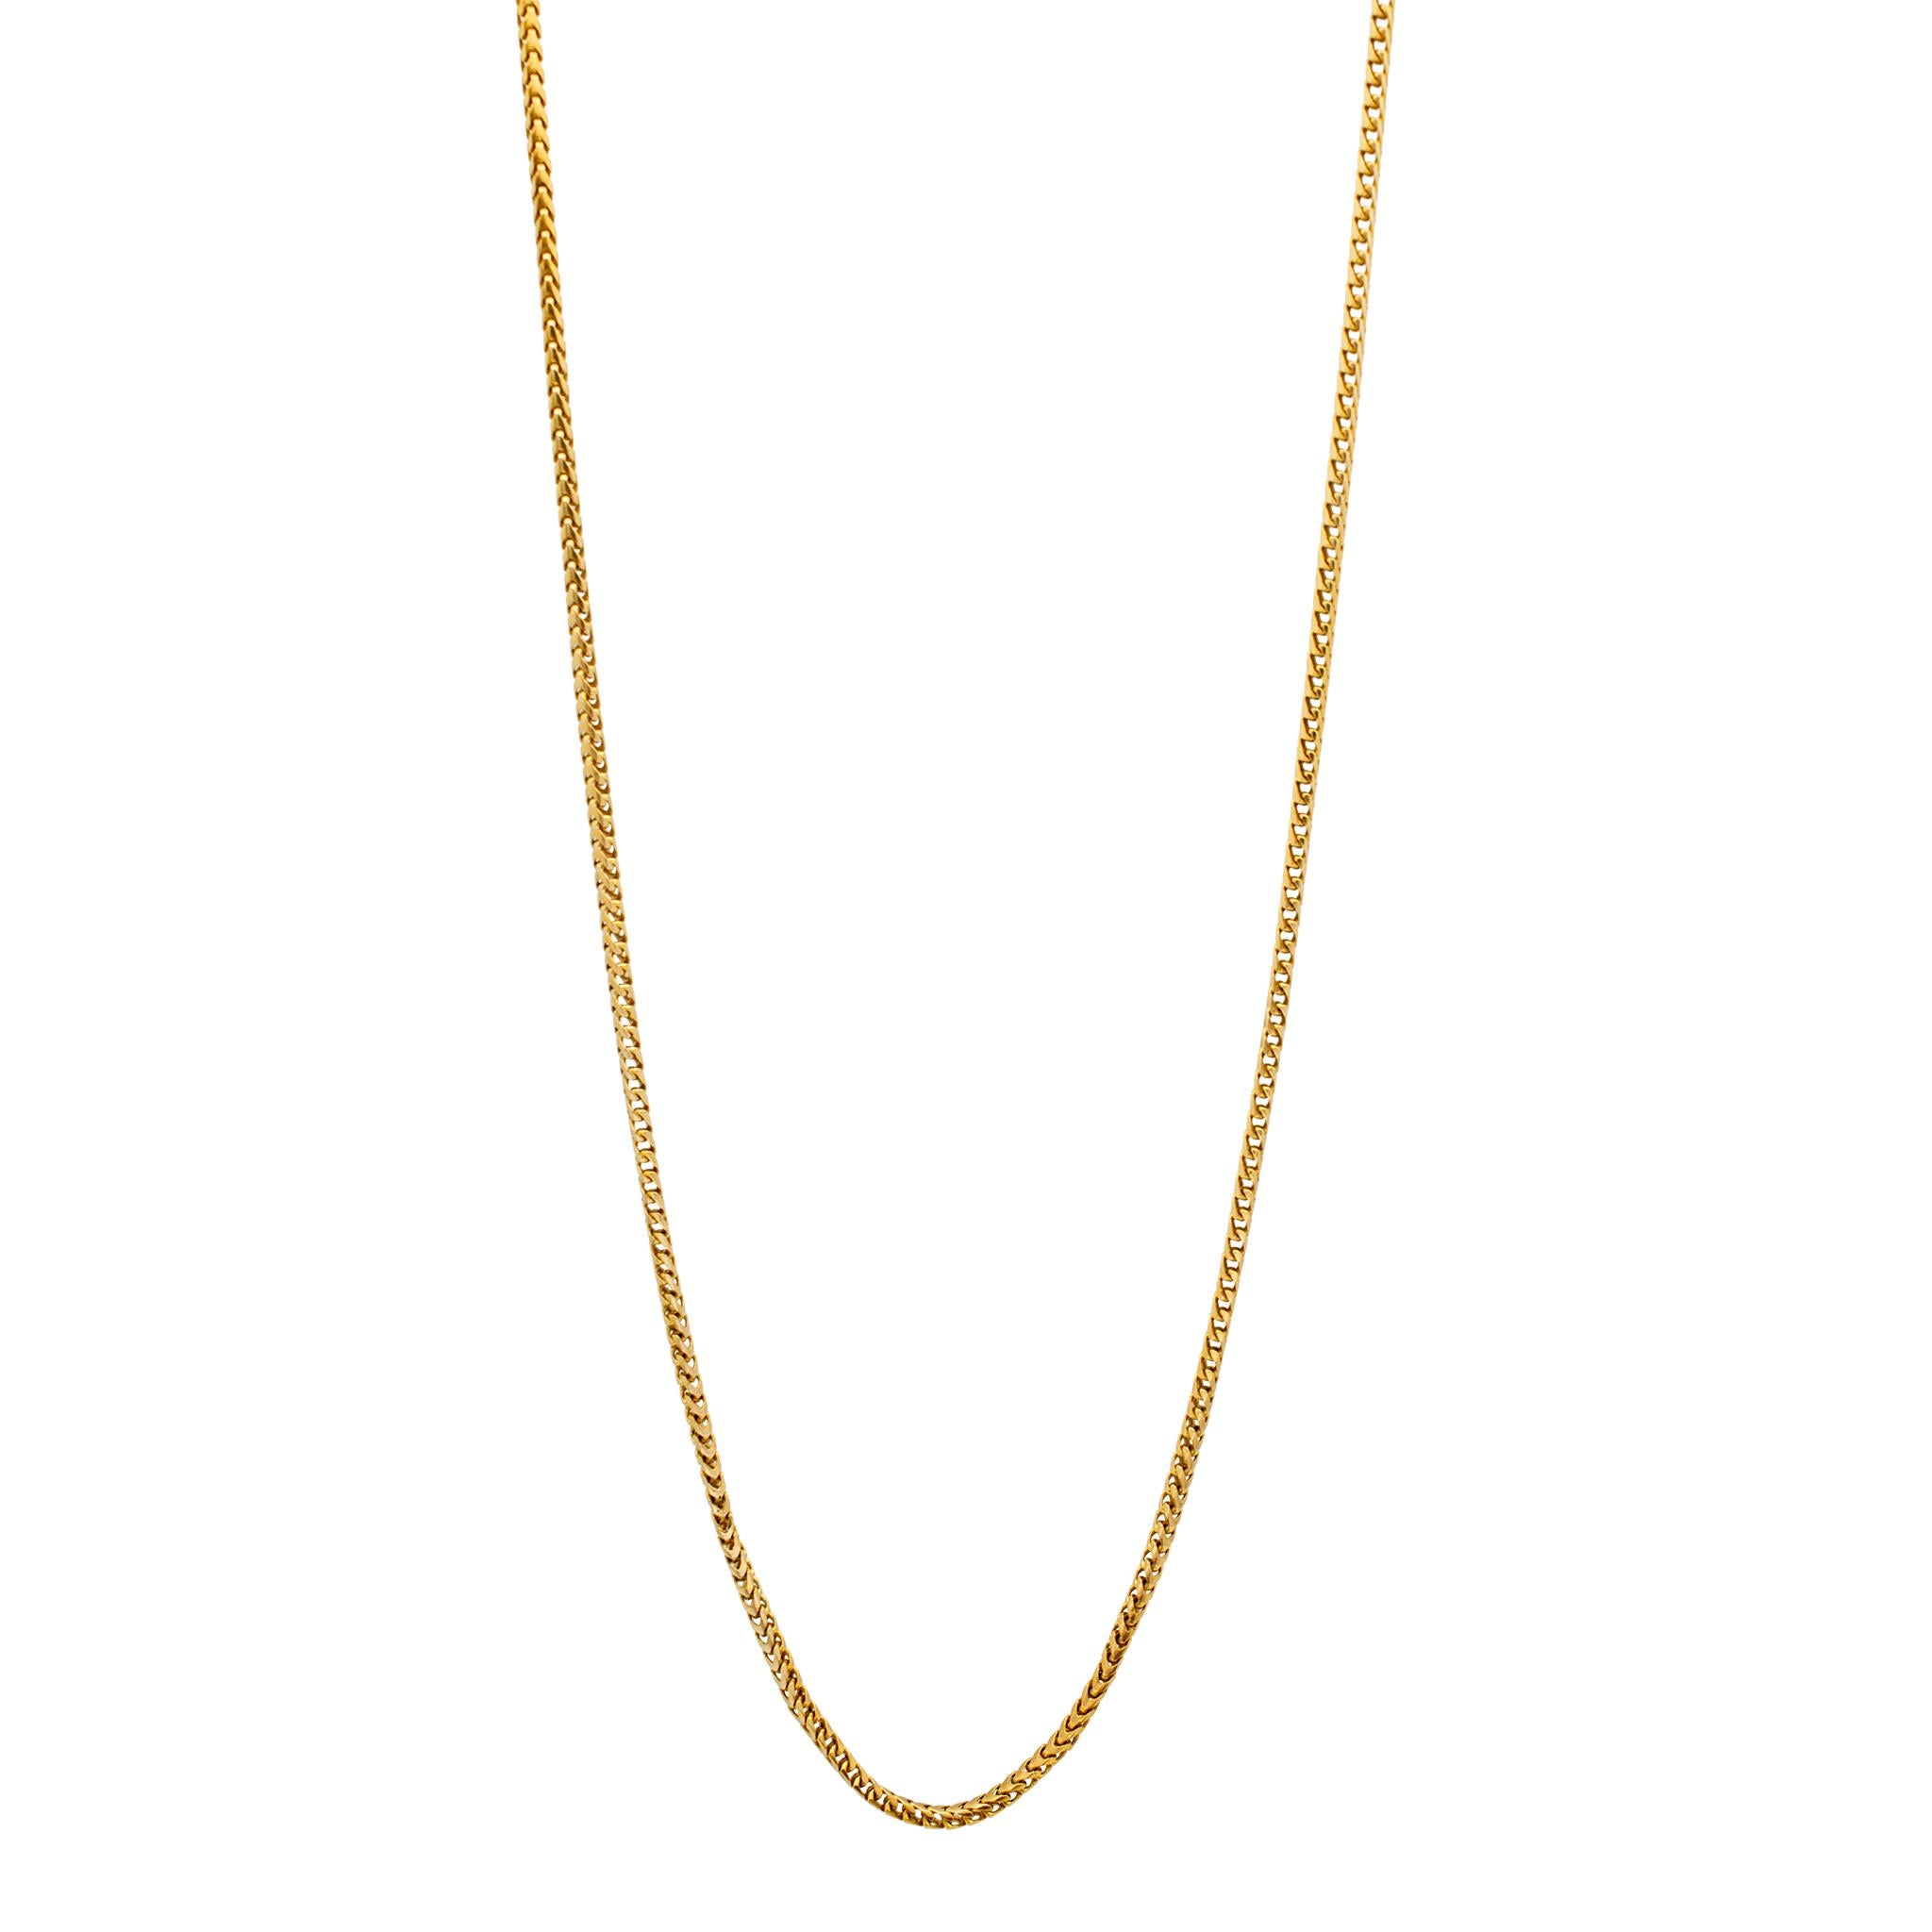 14K Yellow Gold Foxtail Link Chain 28” For Sale